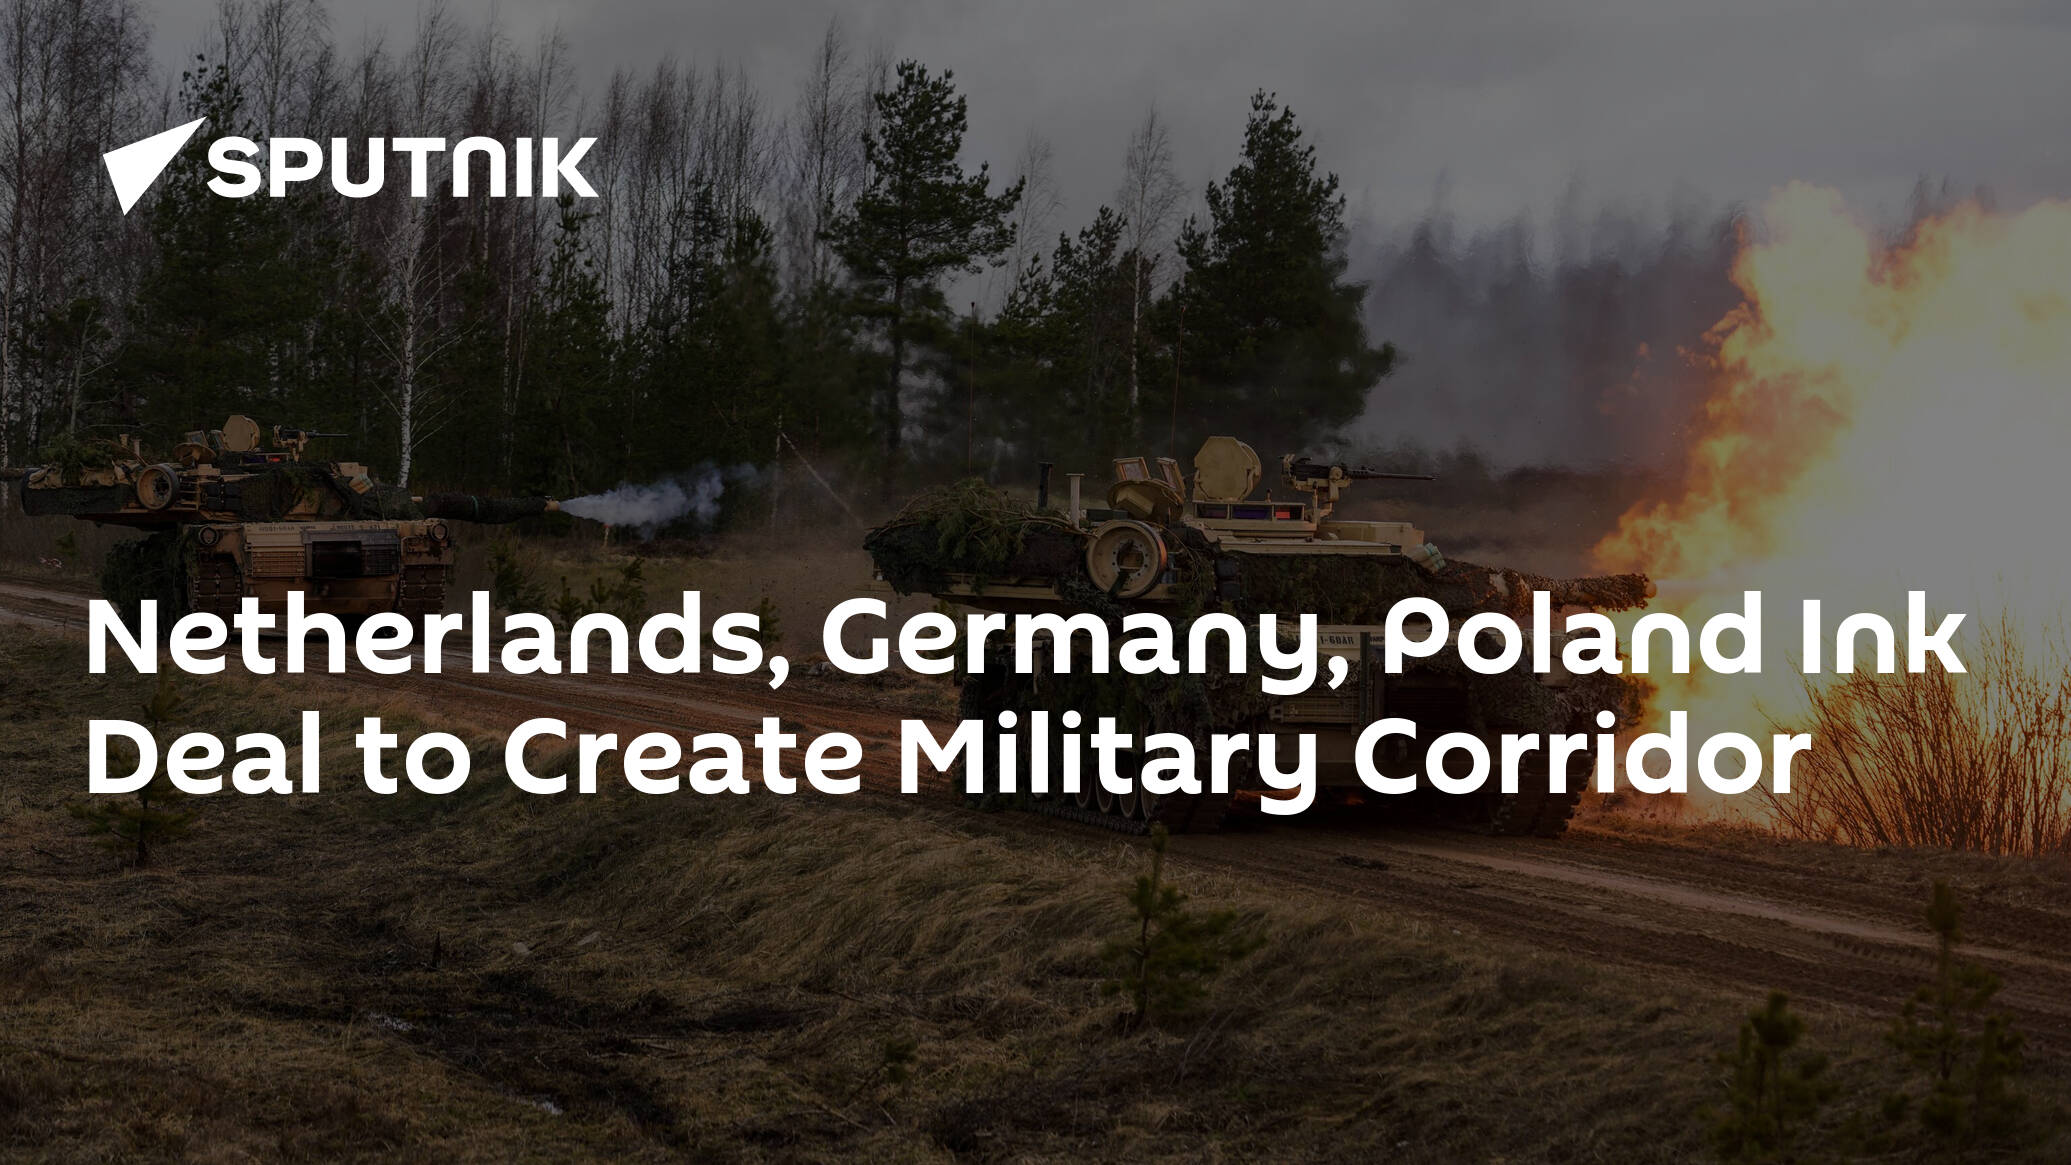 Netherlands, Germany, Poland Sign Declaration to Create Military Corridor